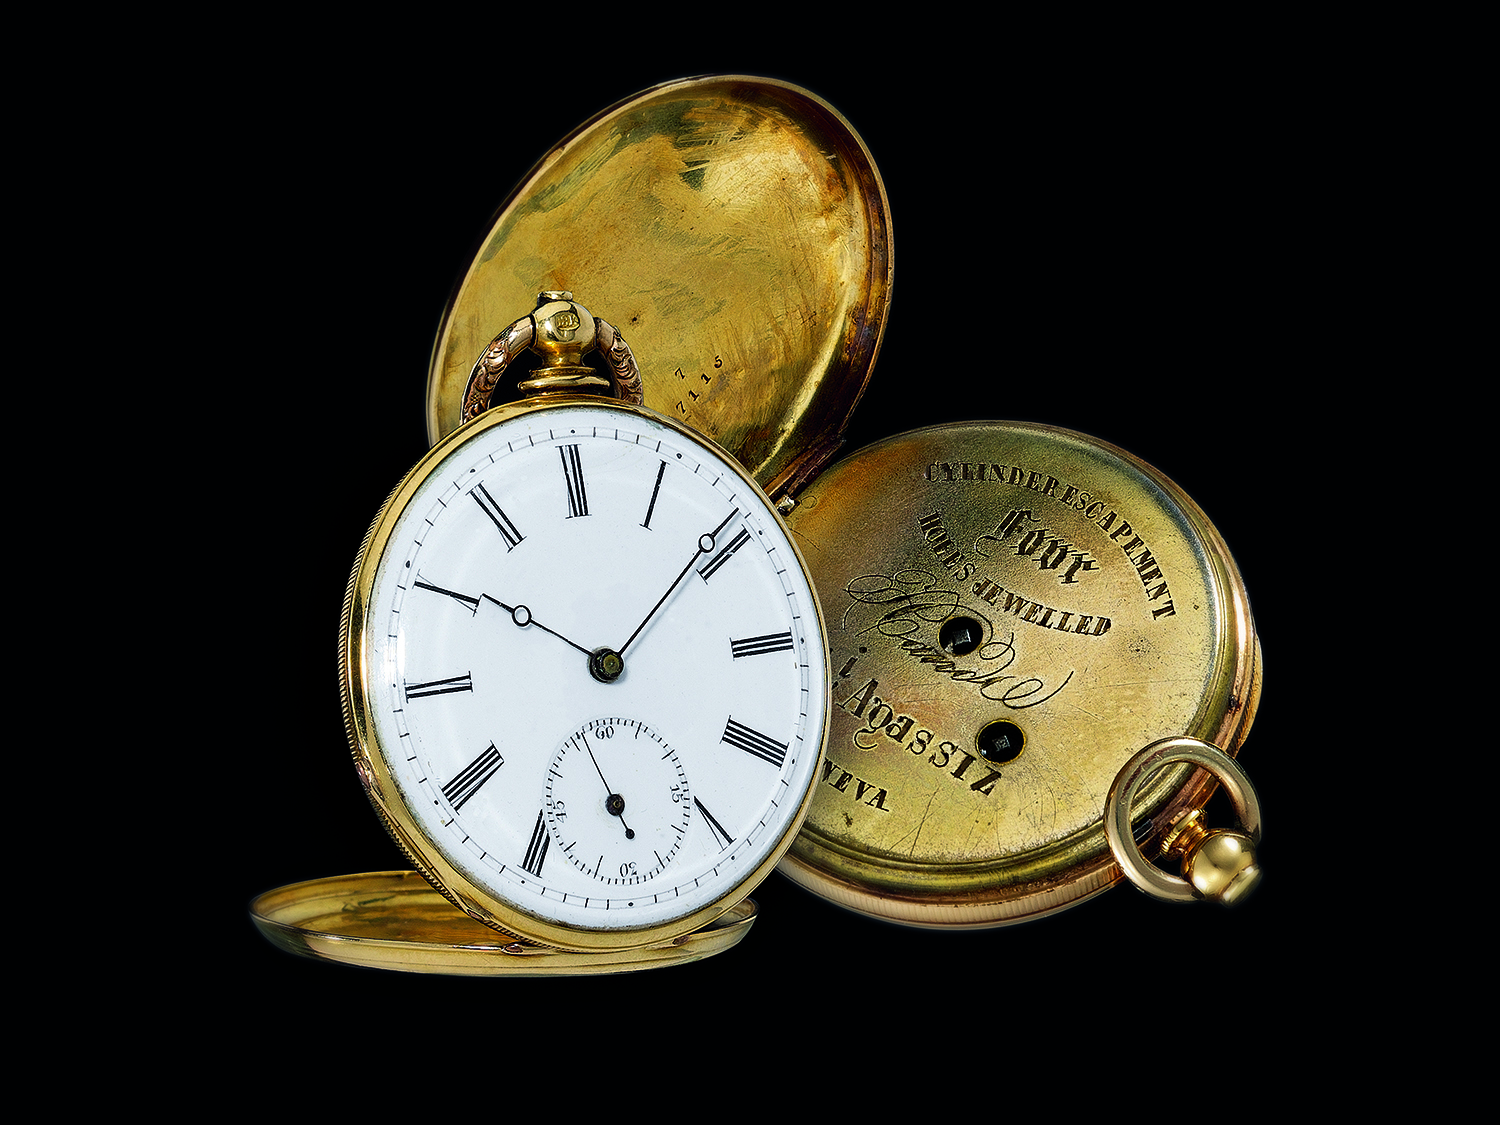 The Saint-Imier watchmaking establishment was founded by Auguste Agassiz, brother of the famous naturalist Louis Agassiz. Auguste and his two partners used to make and sell pocket watches with crown-wheel escapements similar to those produced by the Swiss watchmaking industry in general.